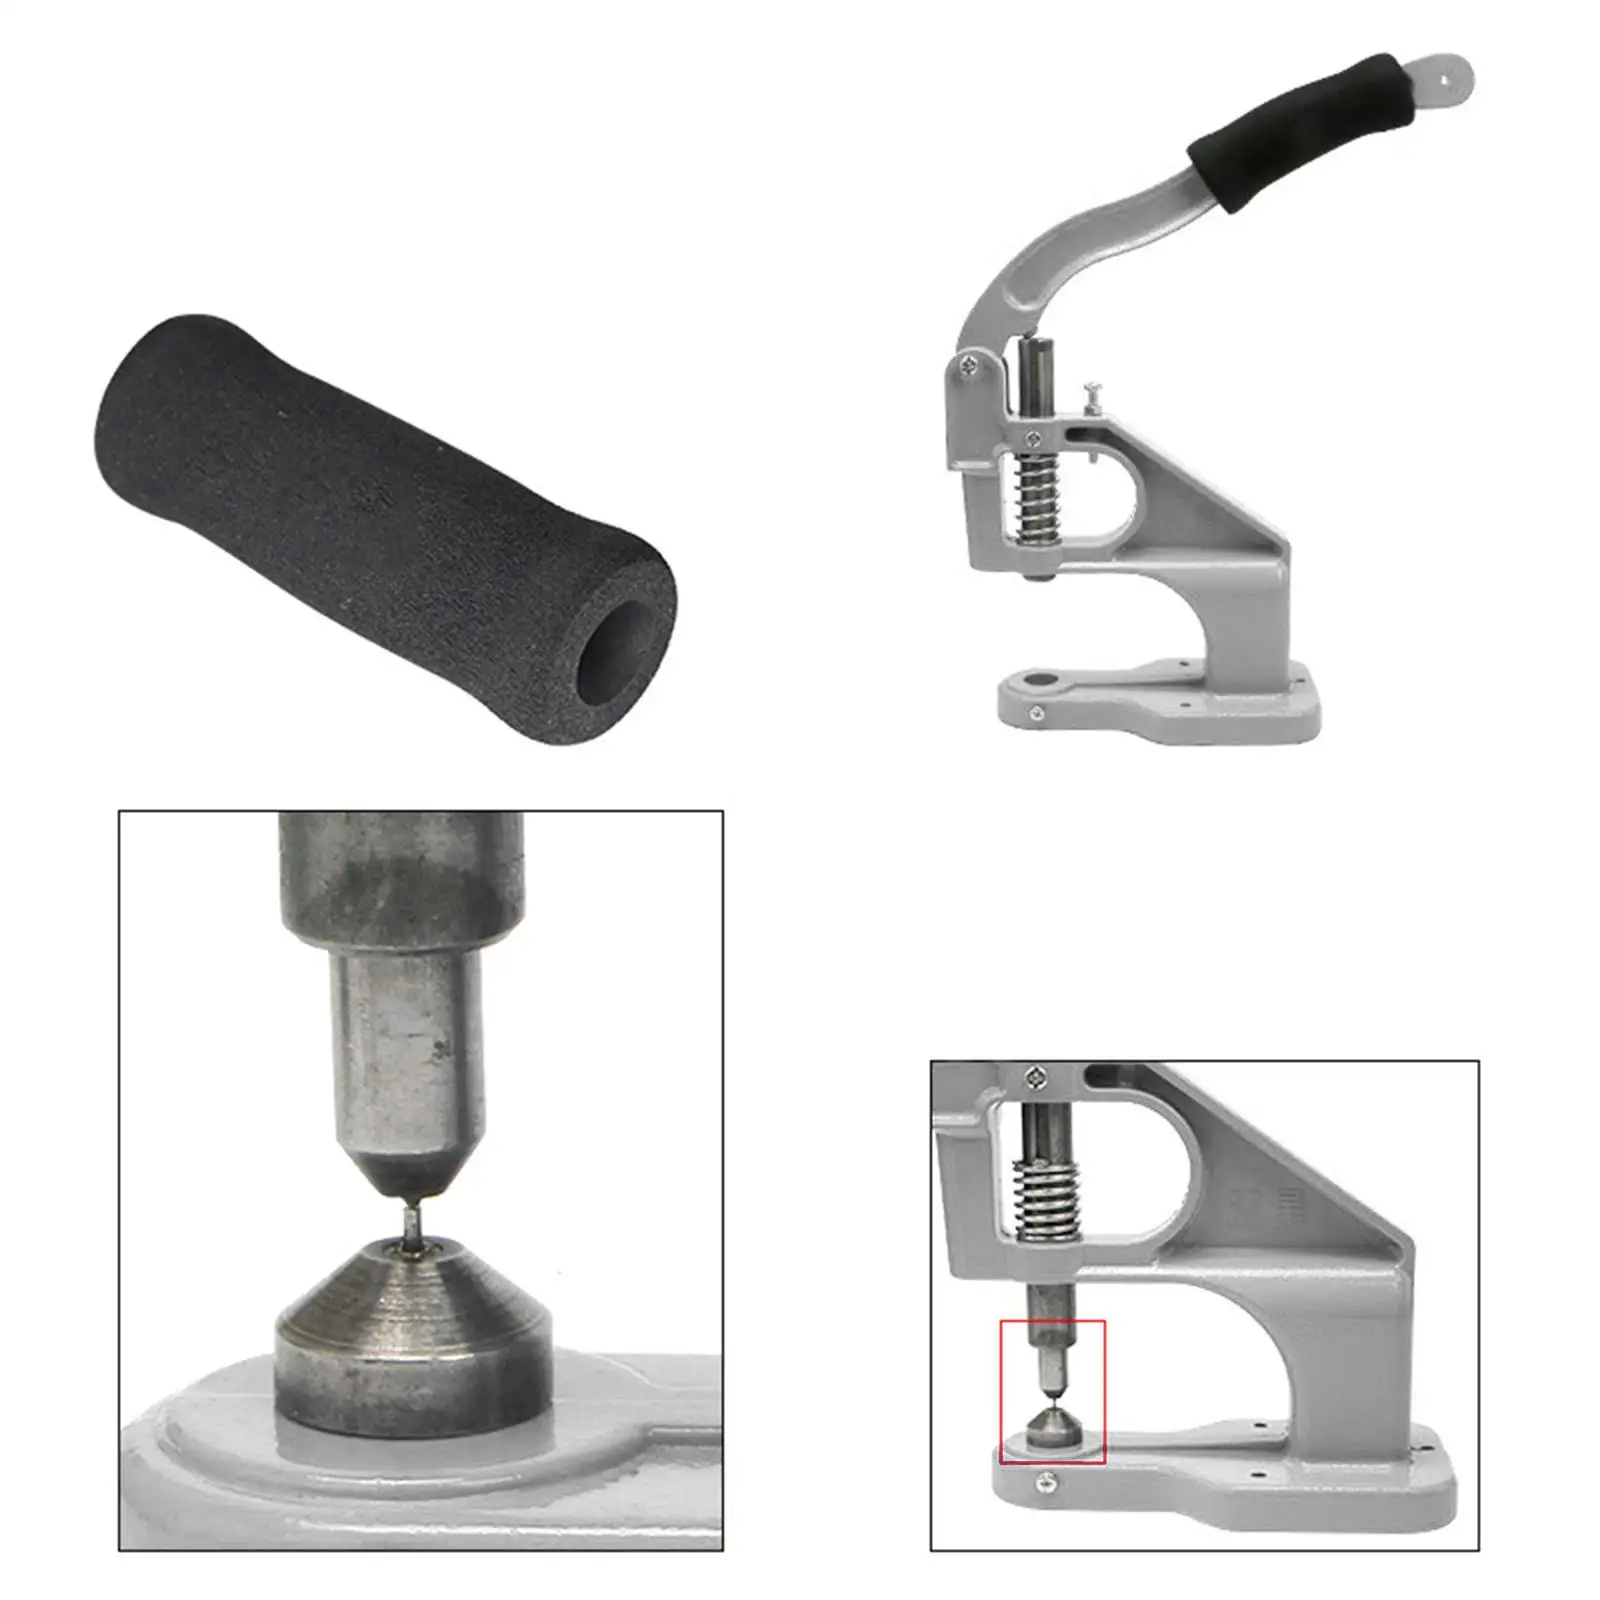 Manual Hand Press Hole Punch Machine for Buttons, Grommets, Snap Buttons,